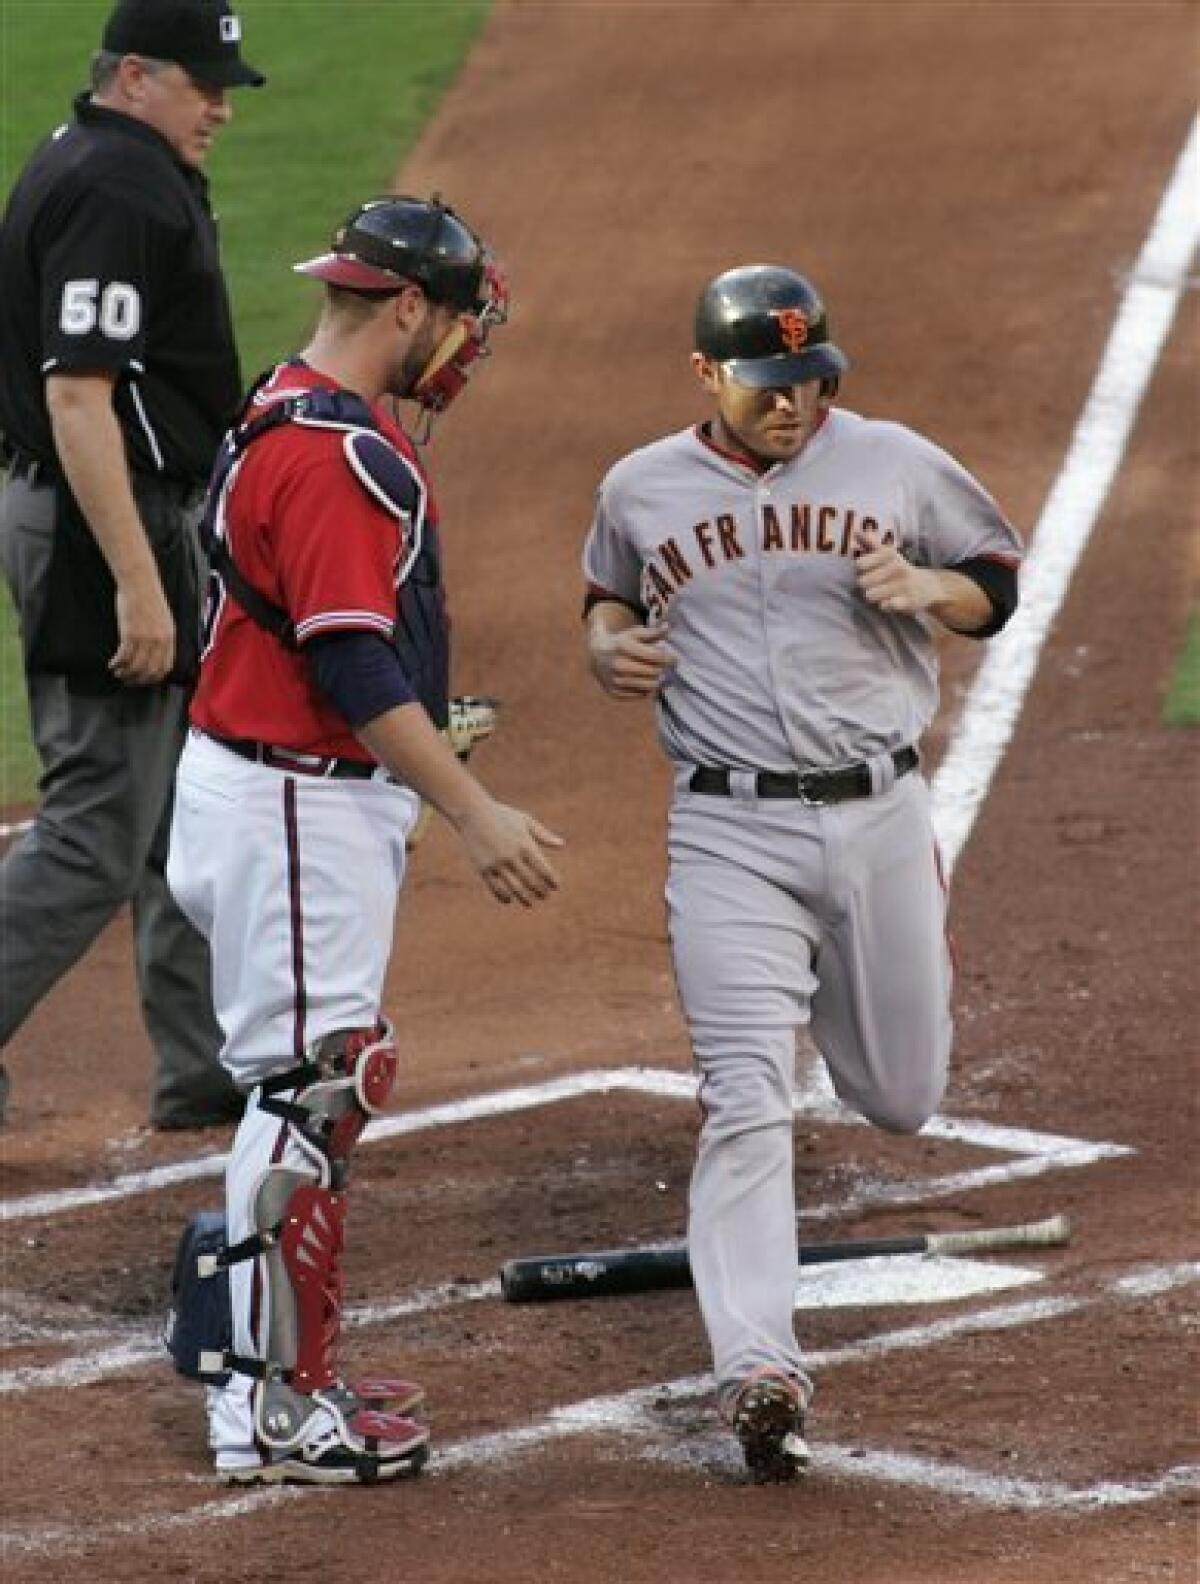 Conrad's 3rd error gives Giants 3-2 win vs. Braves - The San Diego